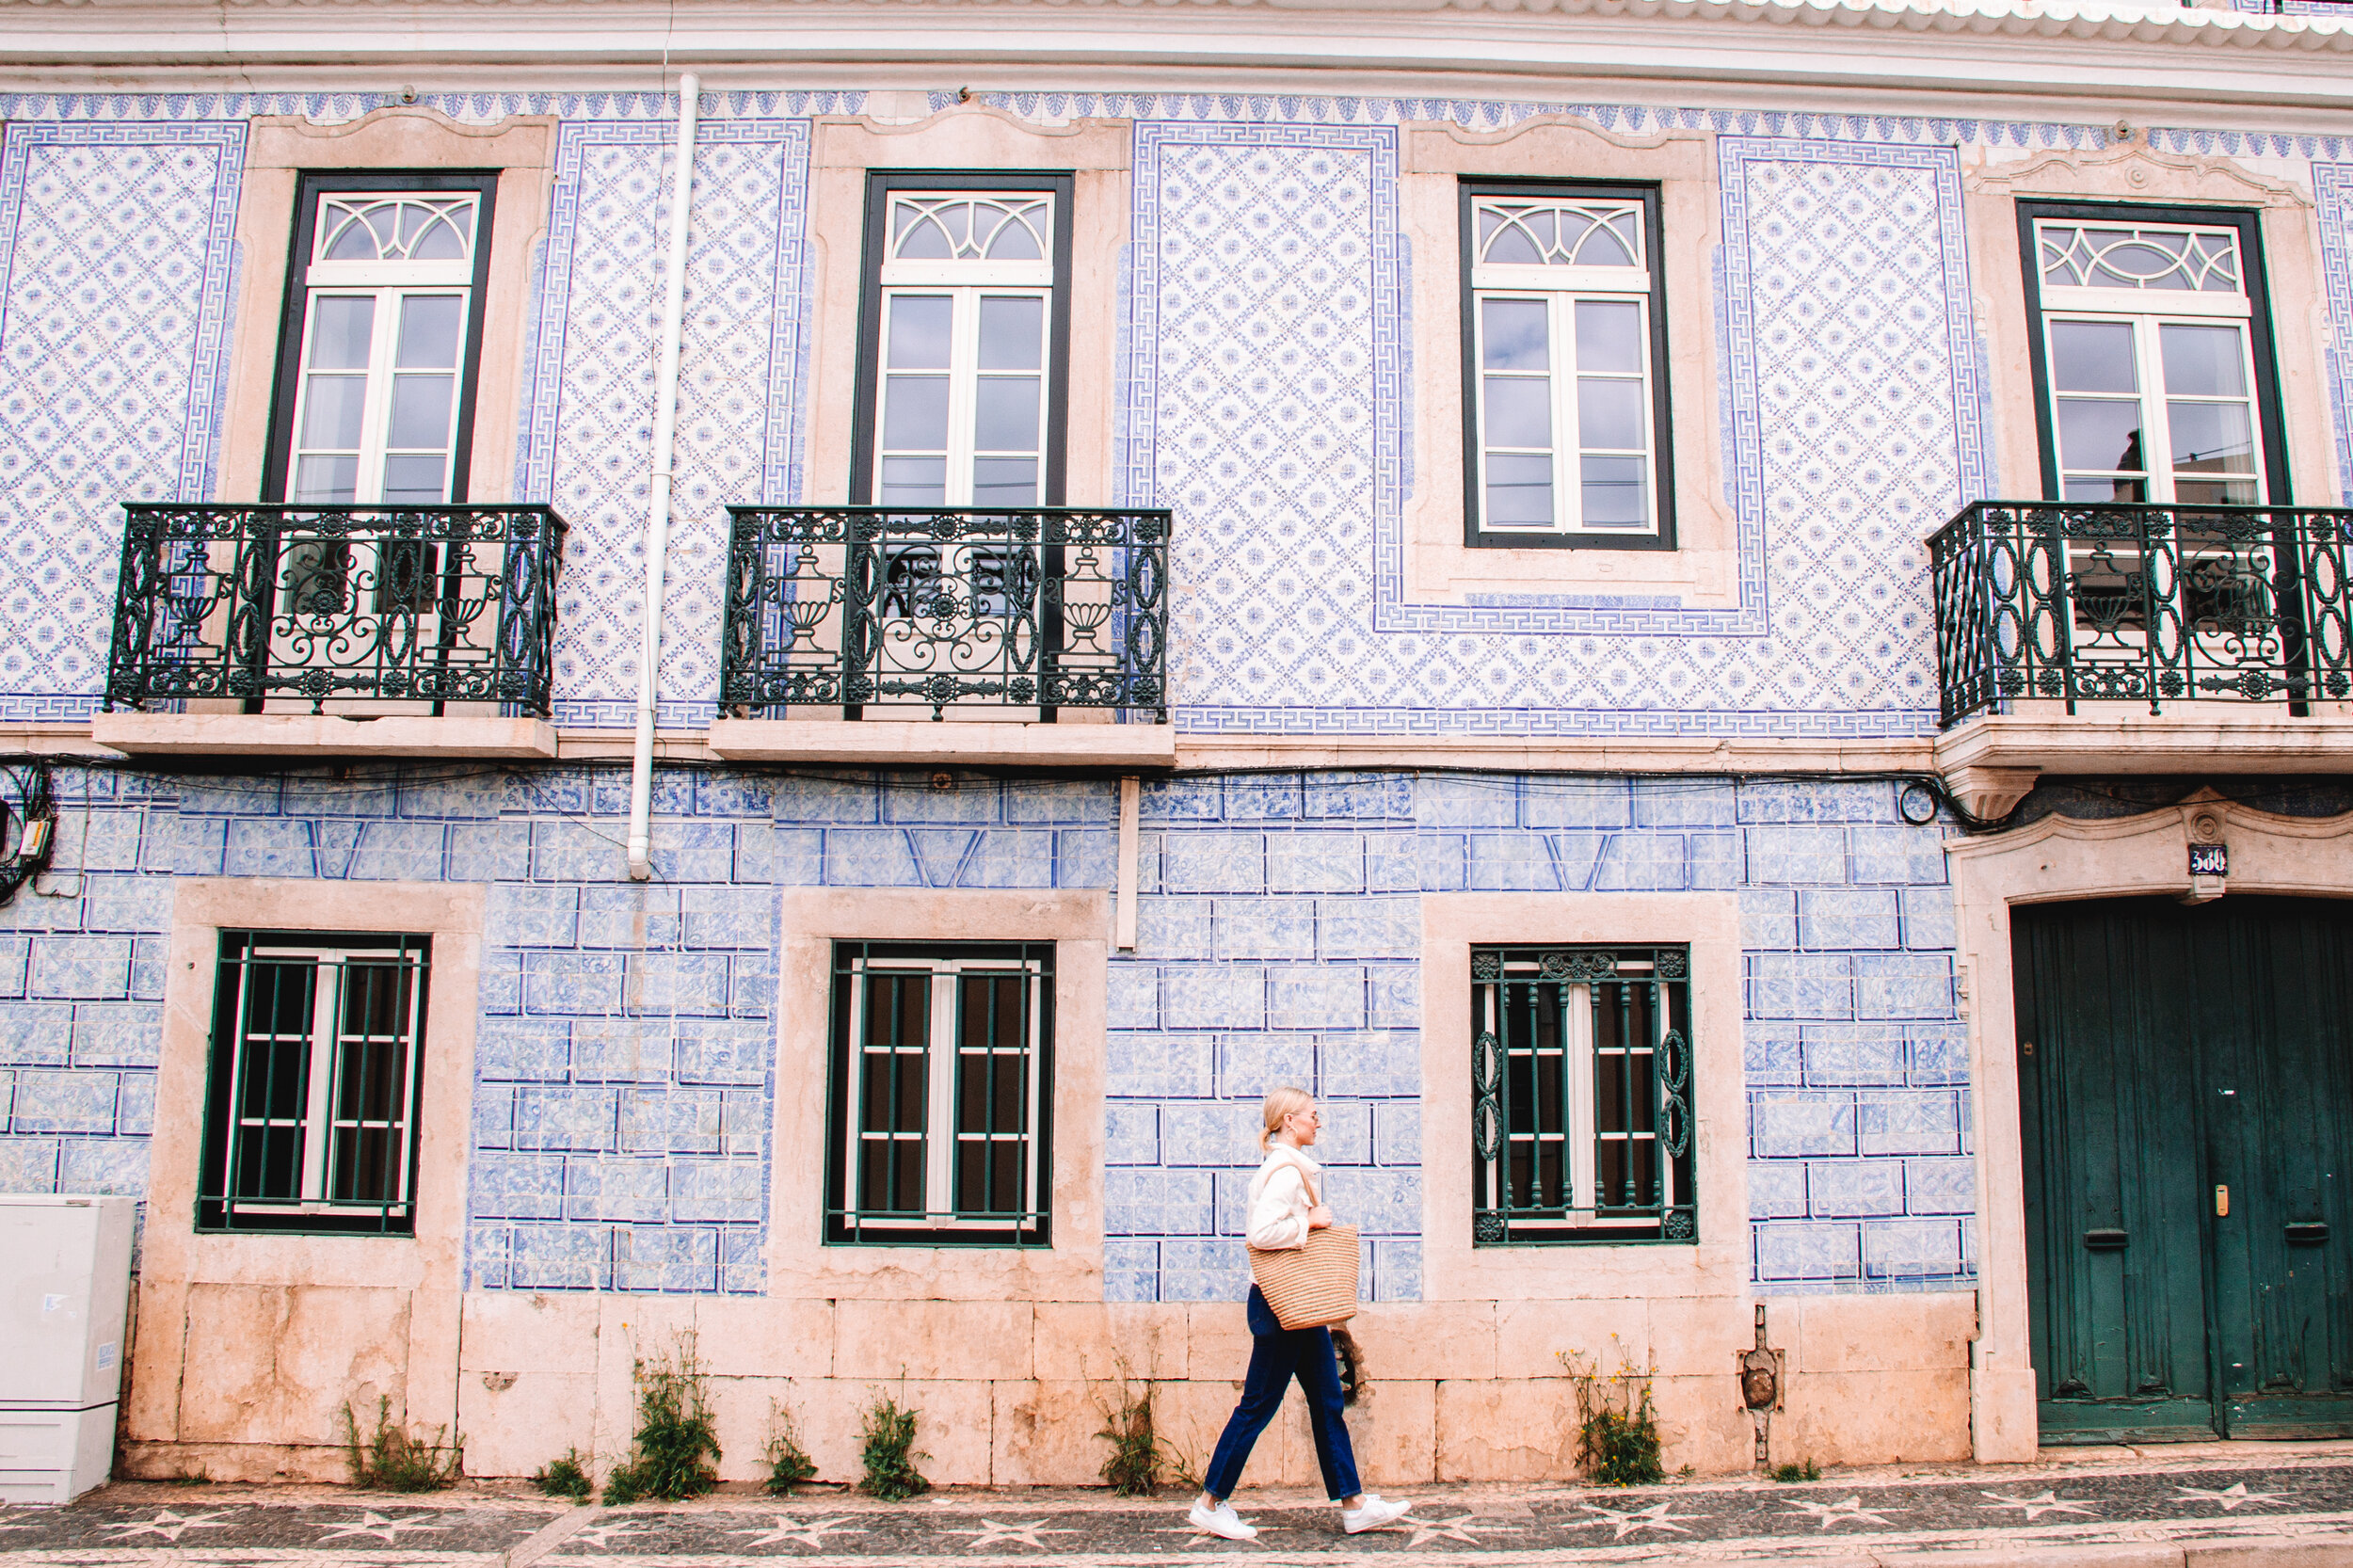 One of the many tiled facades of Lisbon's buildings